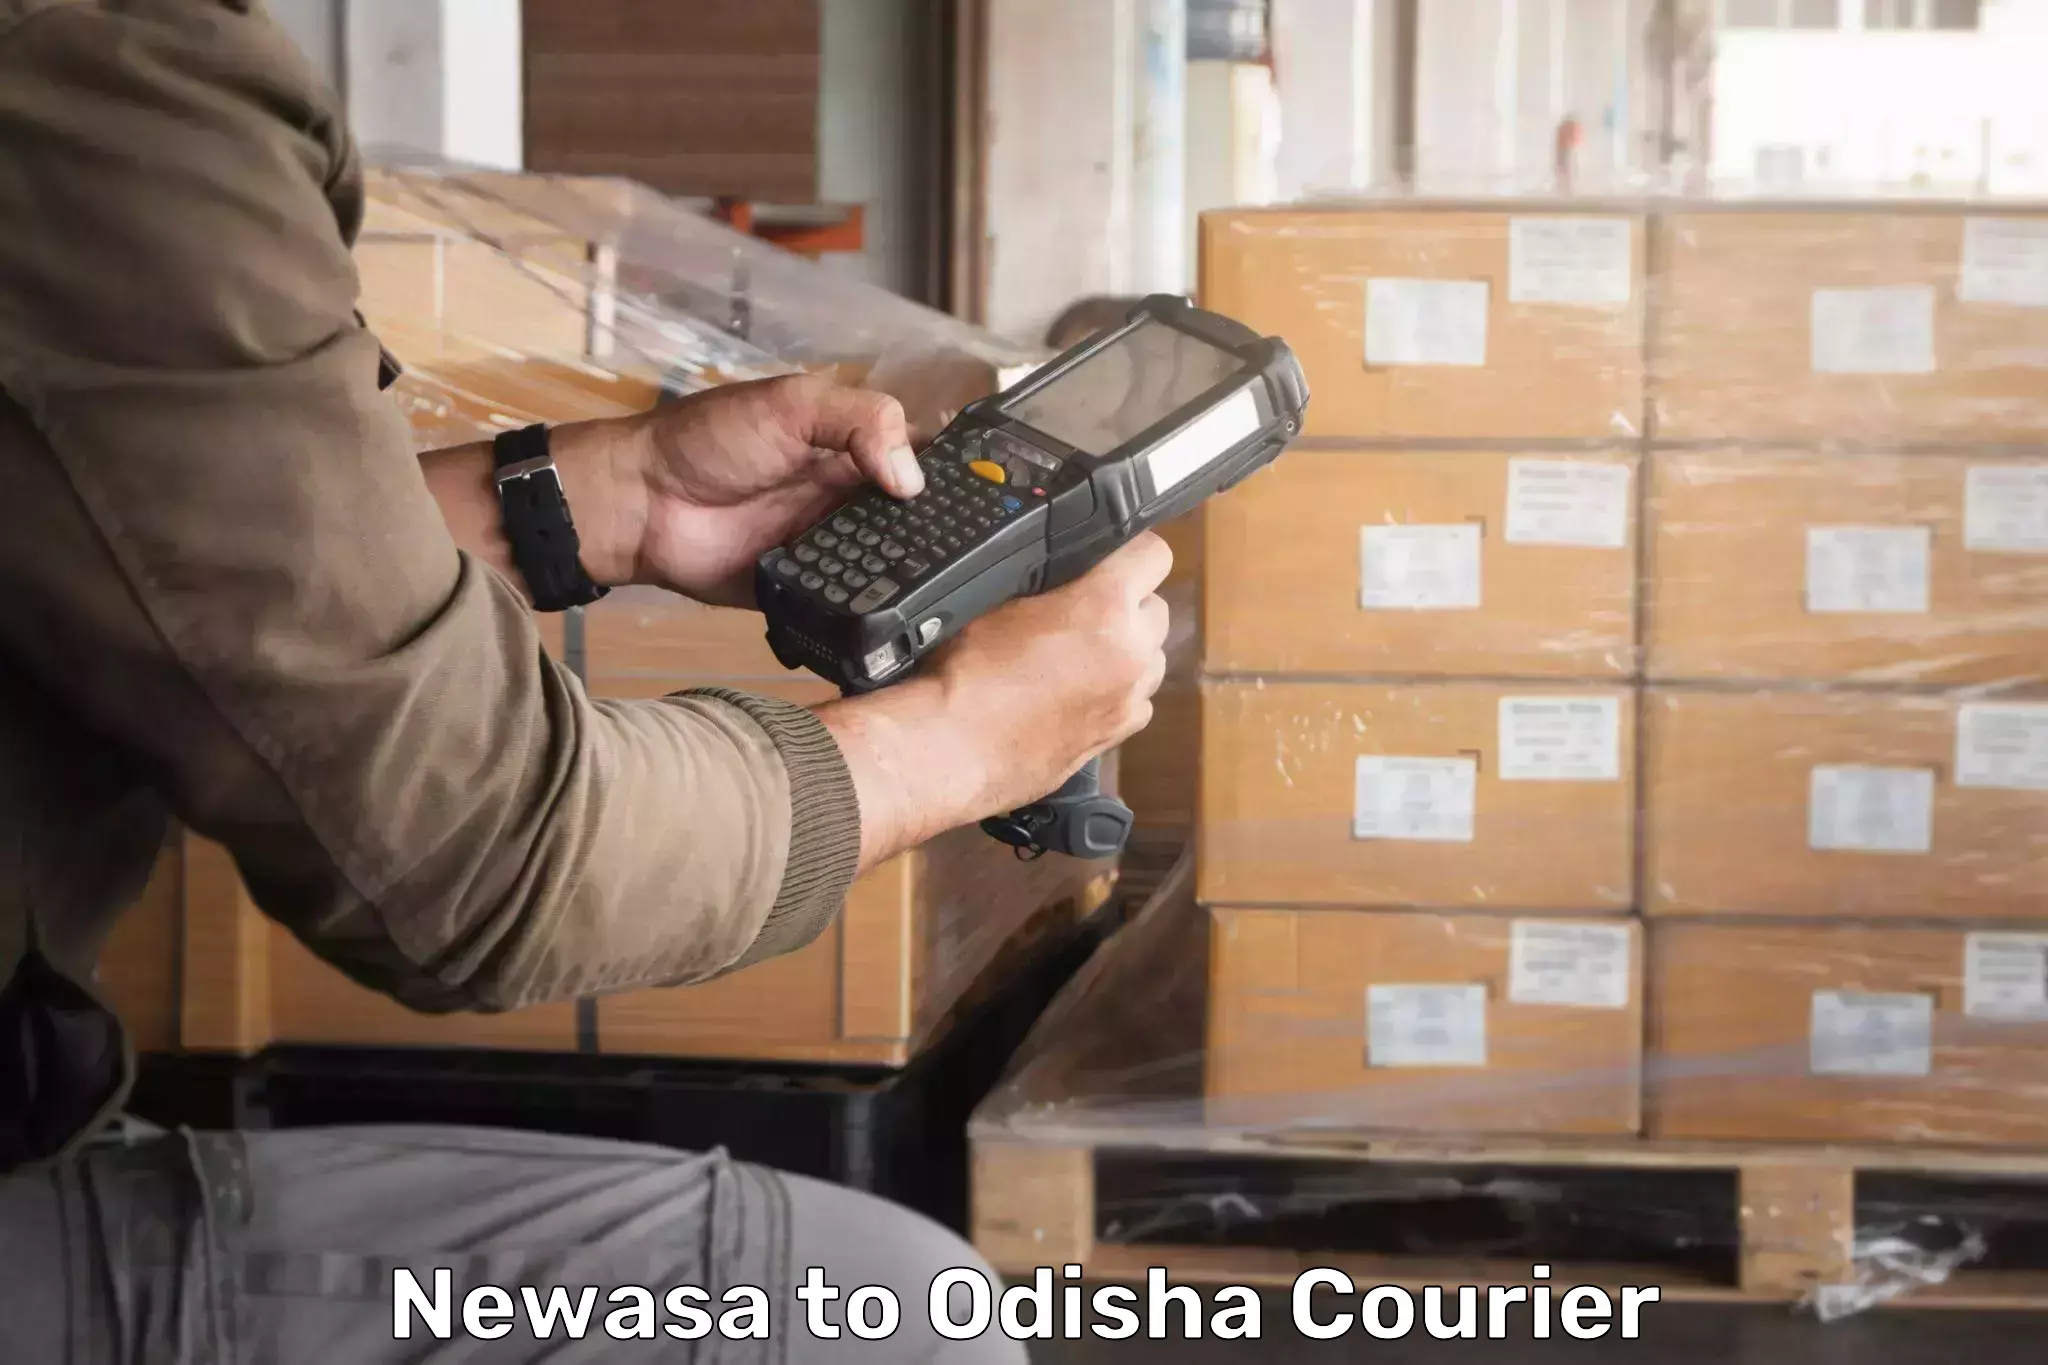 International courier networks Newasa to Aul